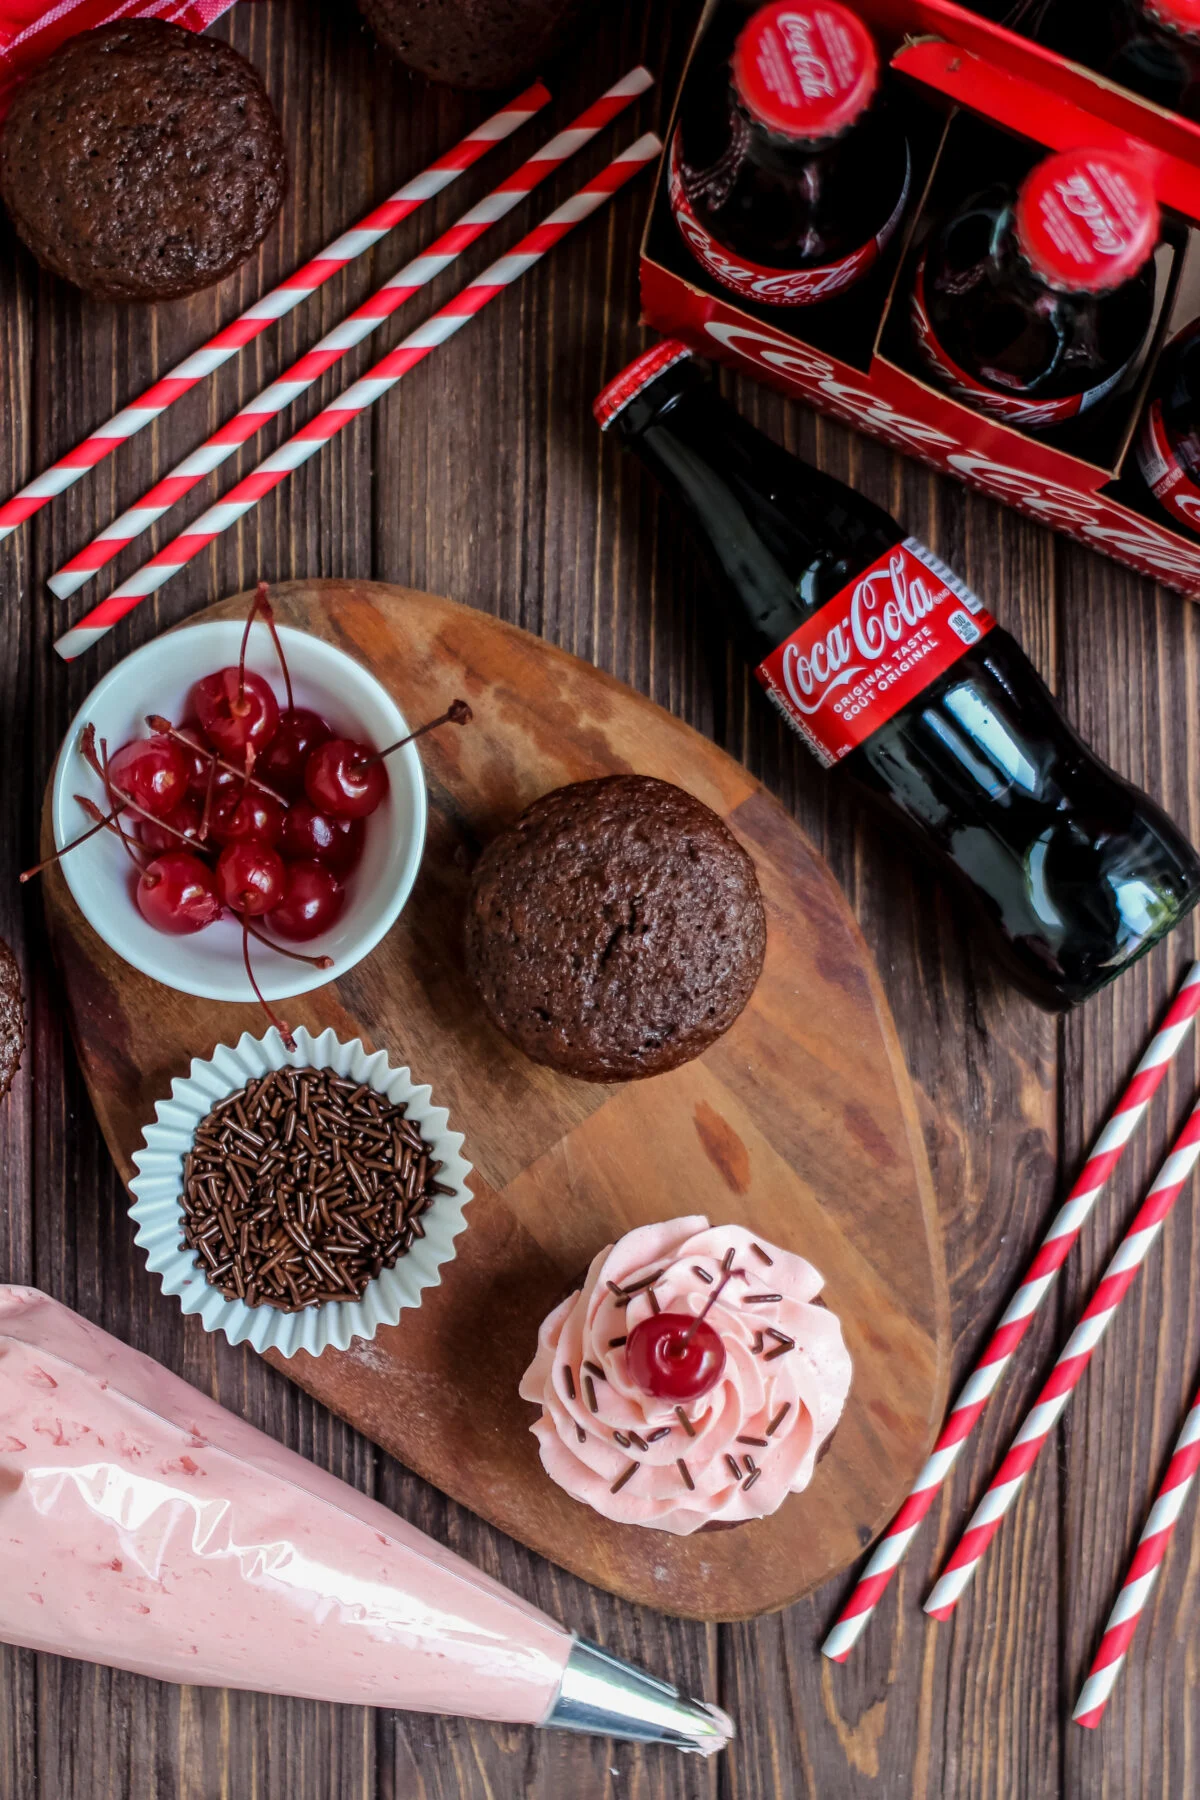 An easy recipe for tasty cherry coke cupcakes made with chocolate cake mix, cola, and maraschino cherries. A perfect treat for any occasion!